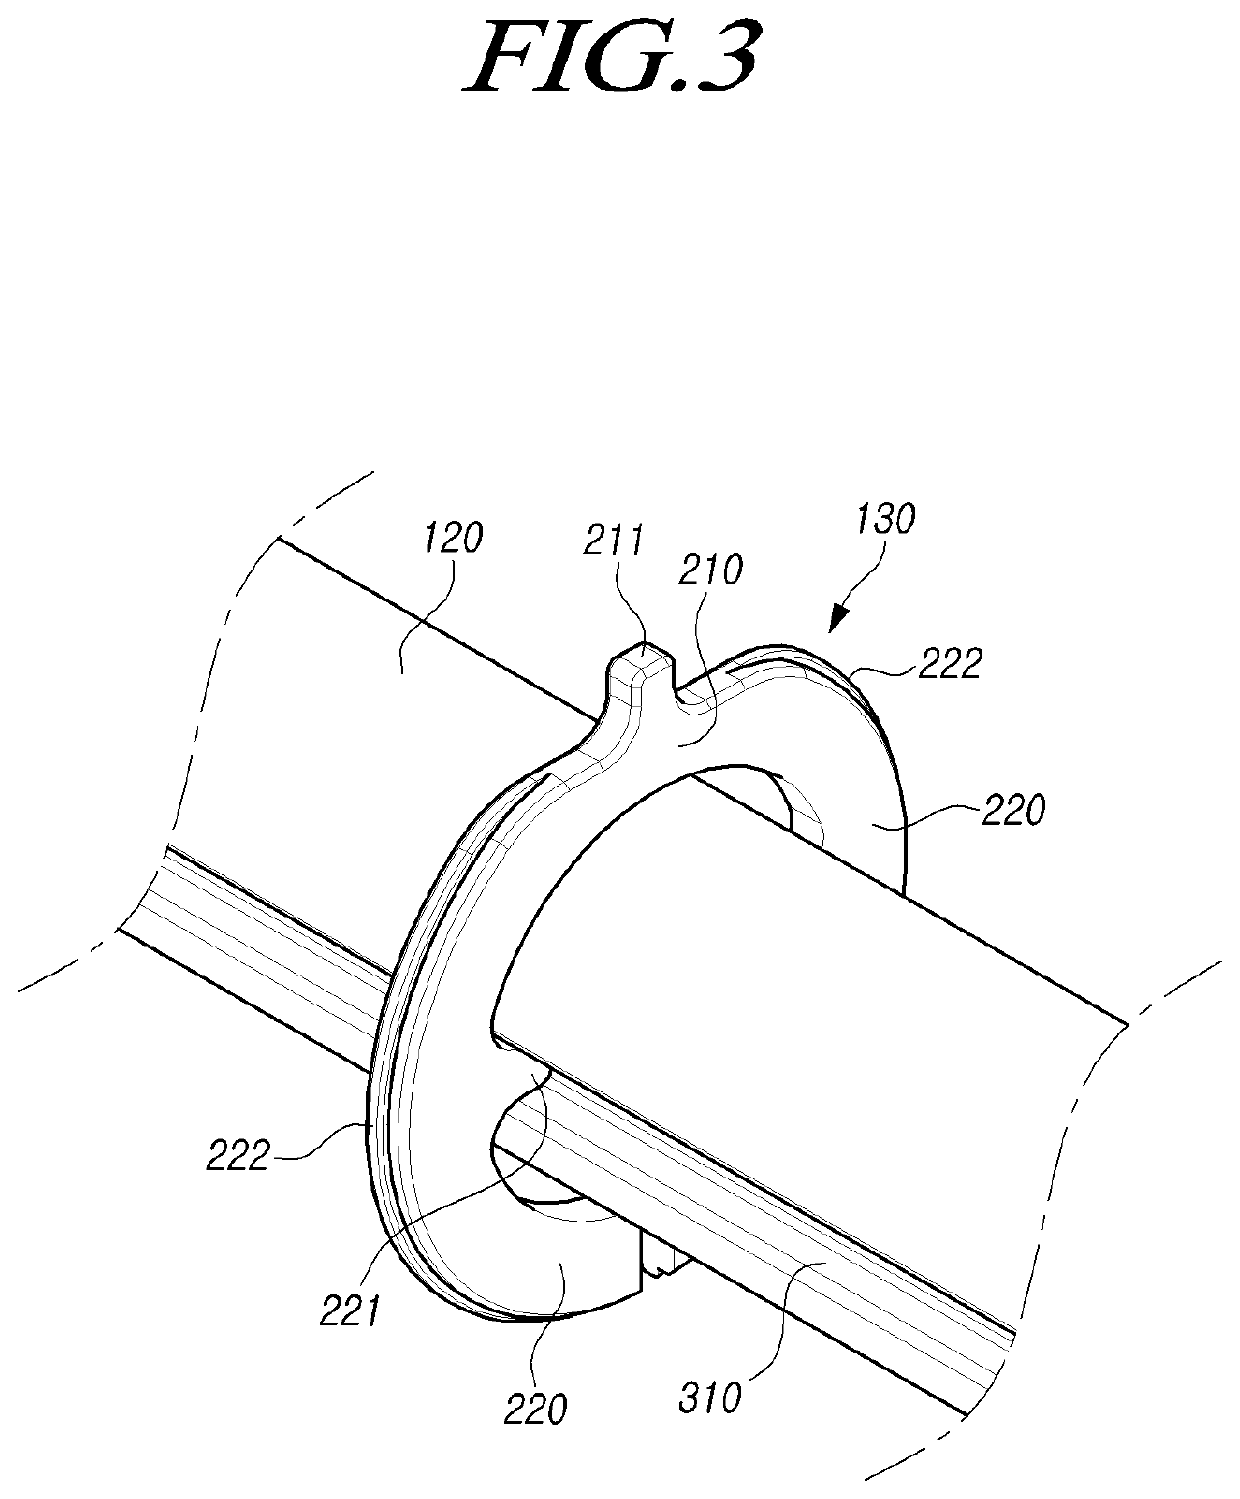 Steer-by-wire type steering device